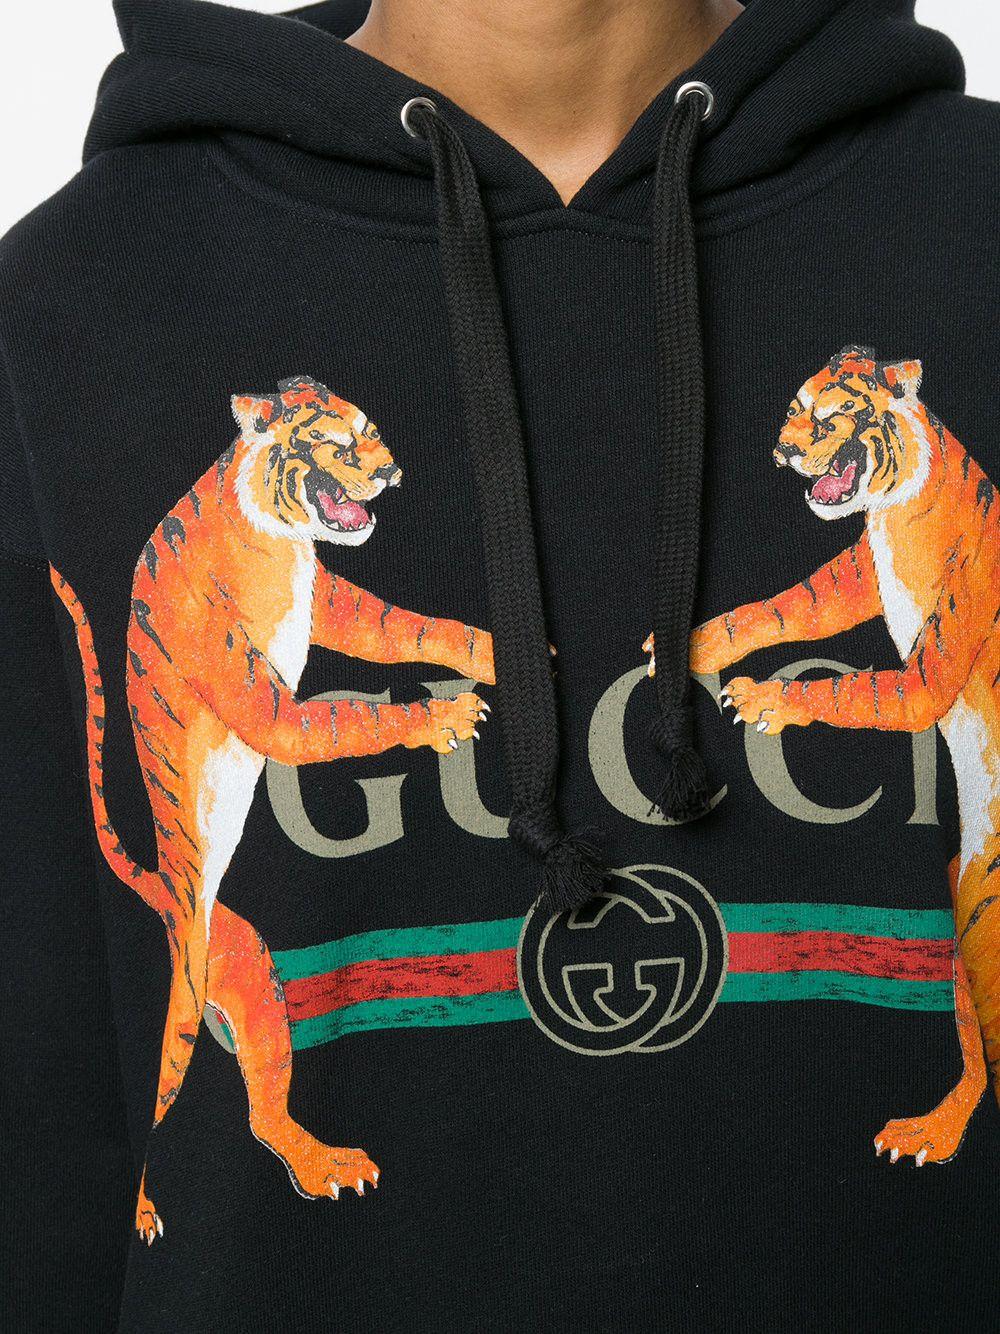 Gucci Tiger Logo - Shop Gucci logo and tigers print hoodie | The Webster